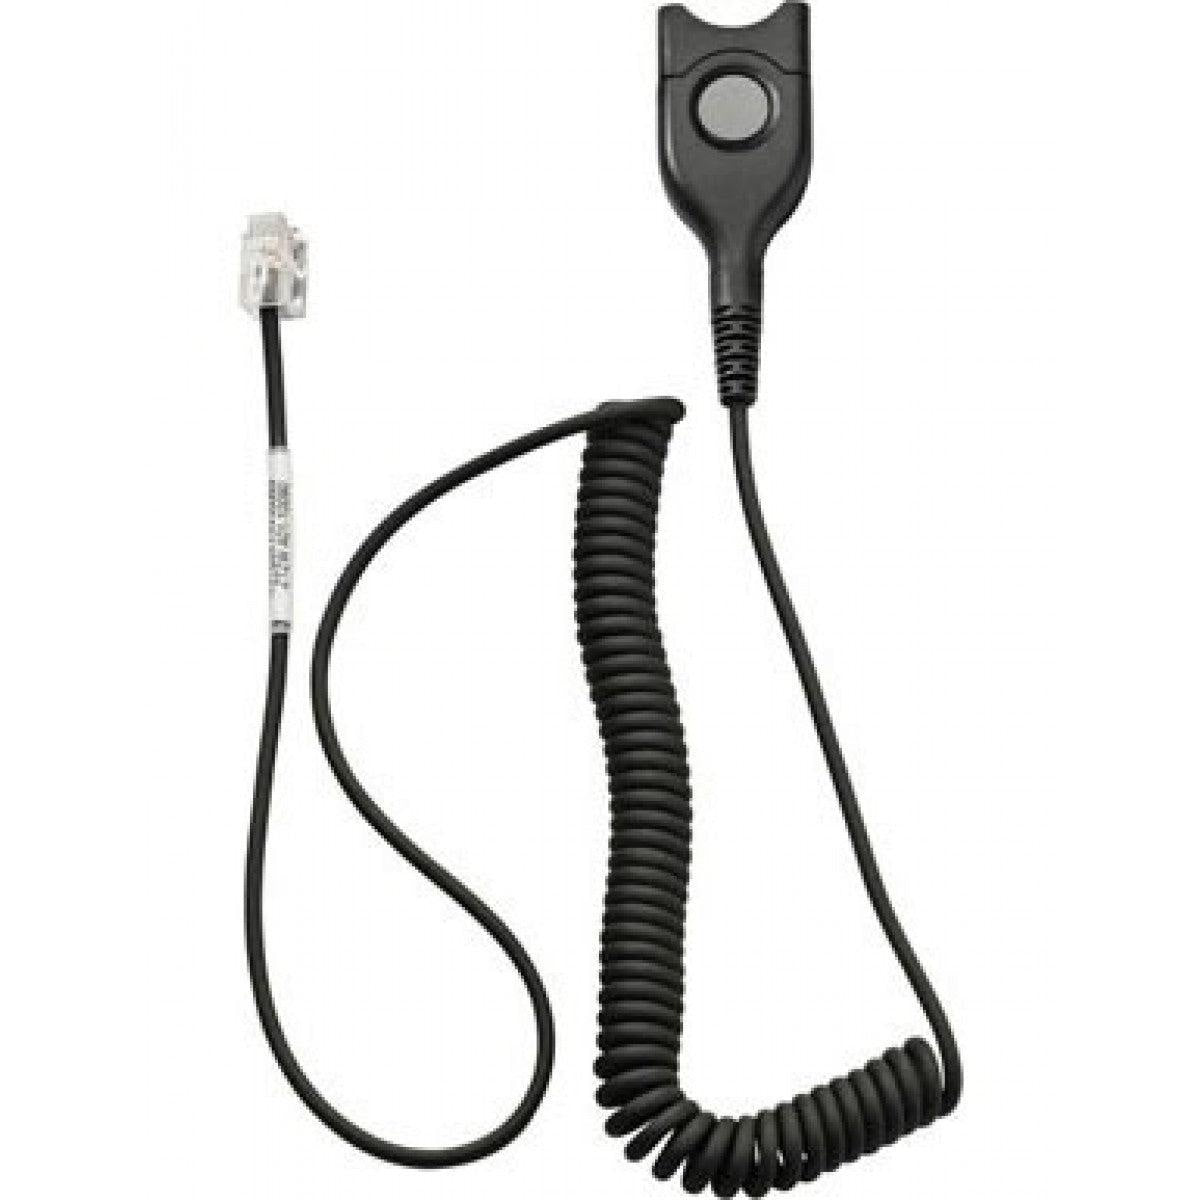 SENNHEISER Standard Bottom cable: EasyDisconnect to Modular Plug - Coiled cable - code 01 for direct connection to most phones. SENNHEISER